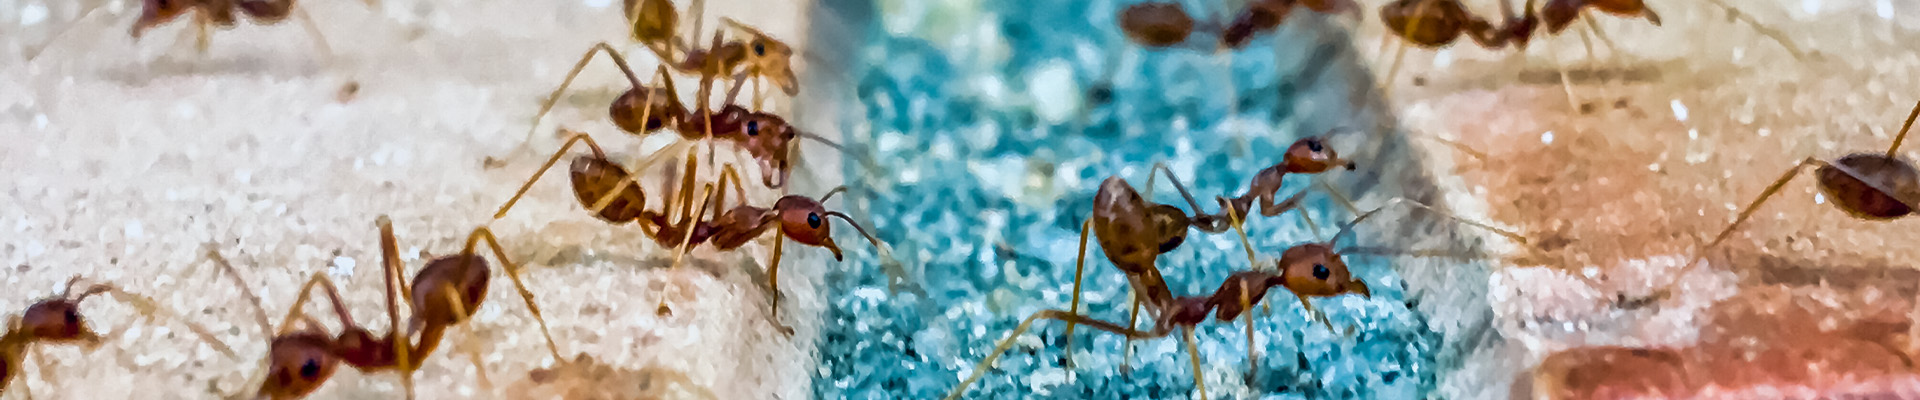 Pavement Ant Page Header